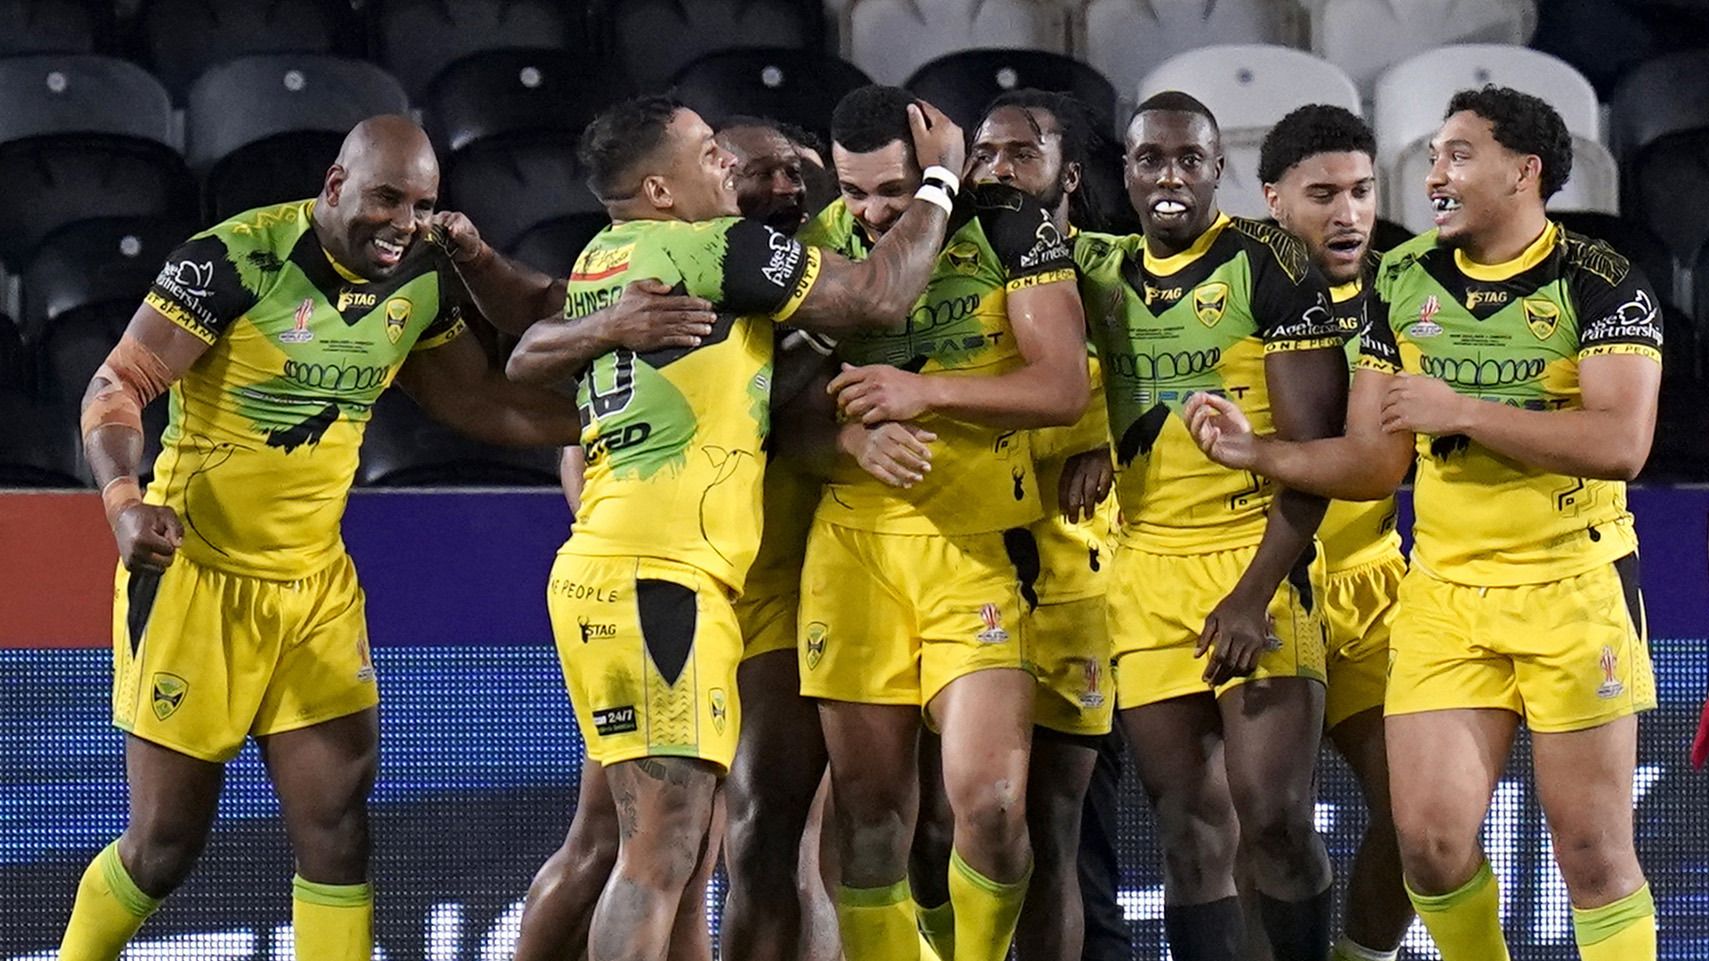 History made as Jamaica score first every try at Rugby League World Cup